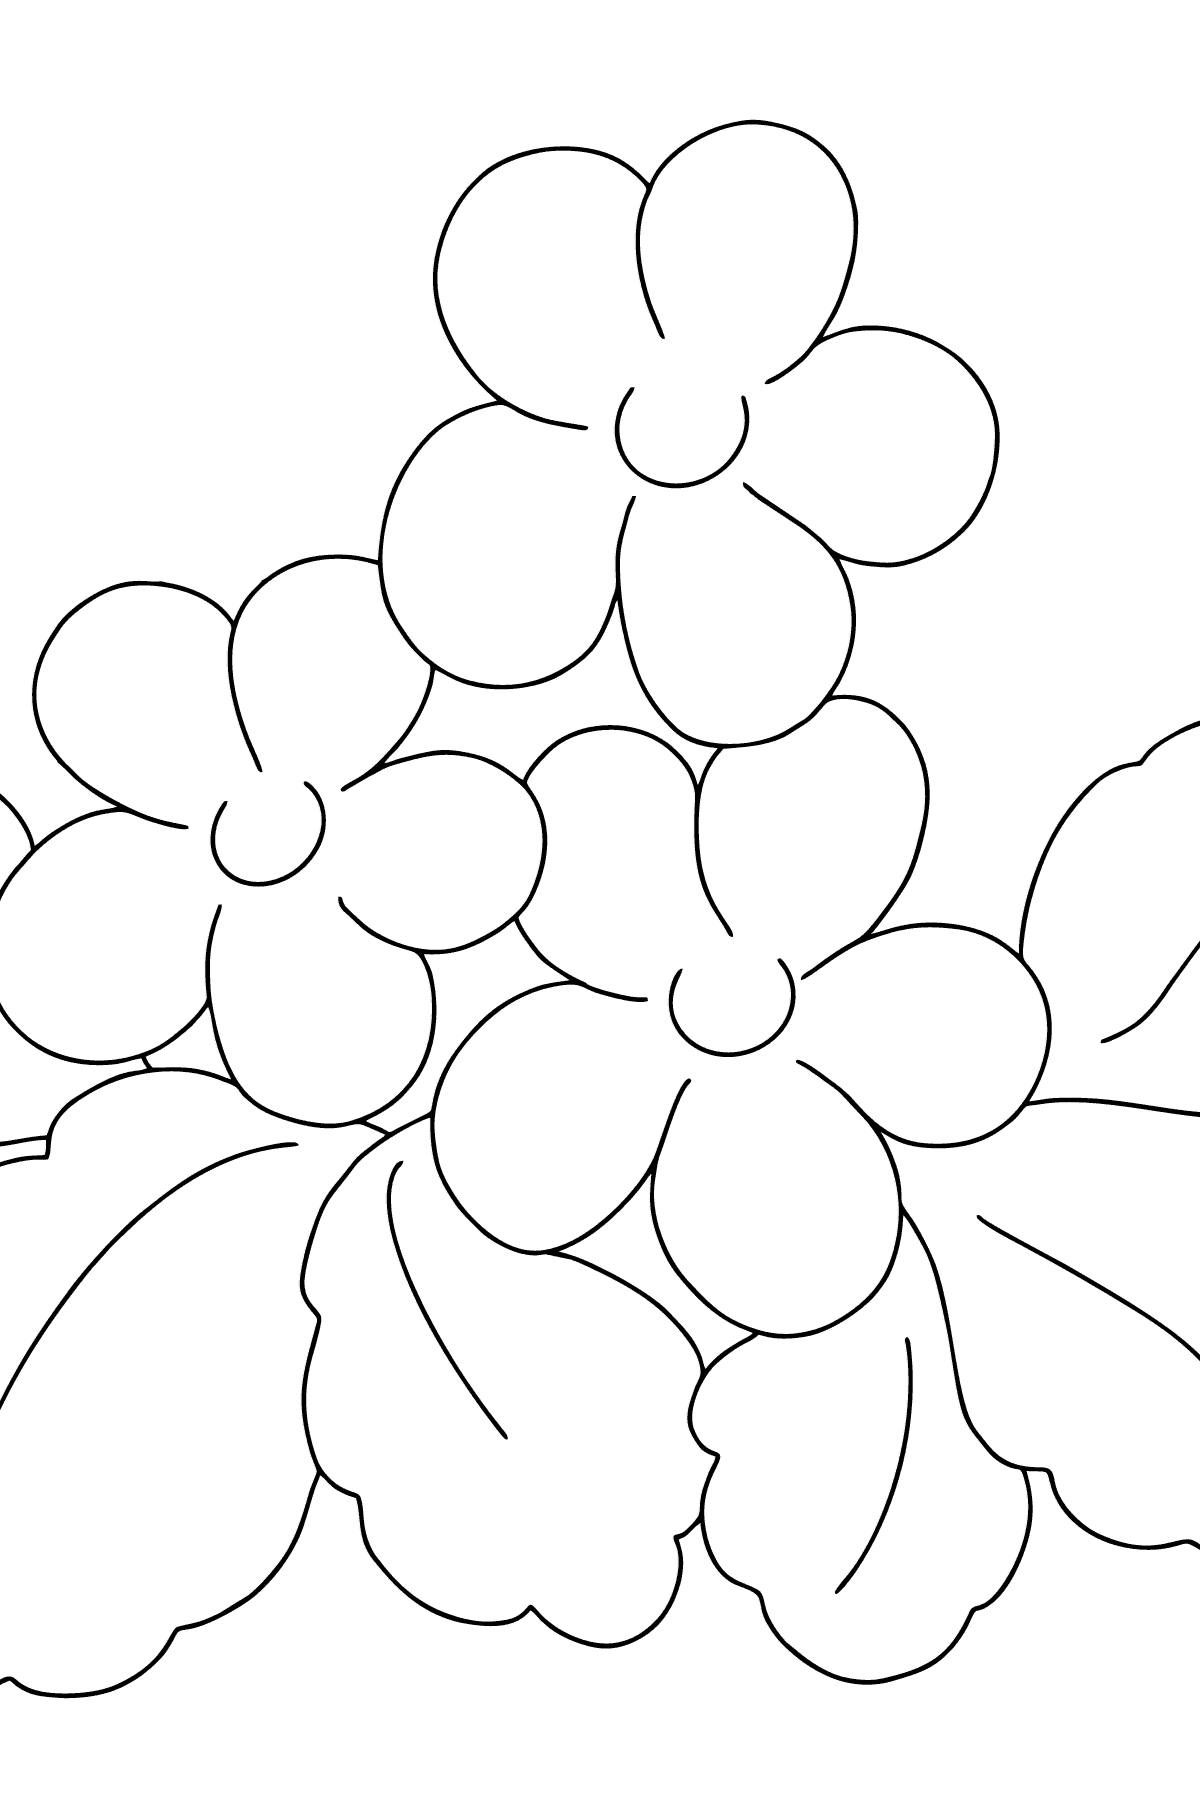 Coloring Page - Spring and Flowers - Coloring Pages for Kids